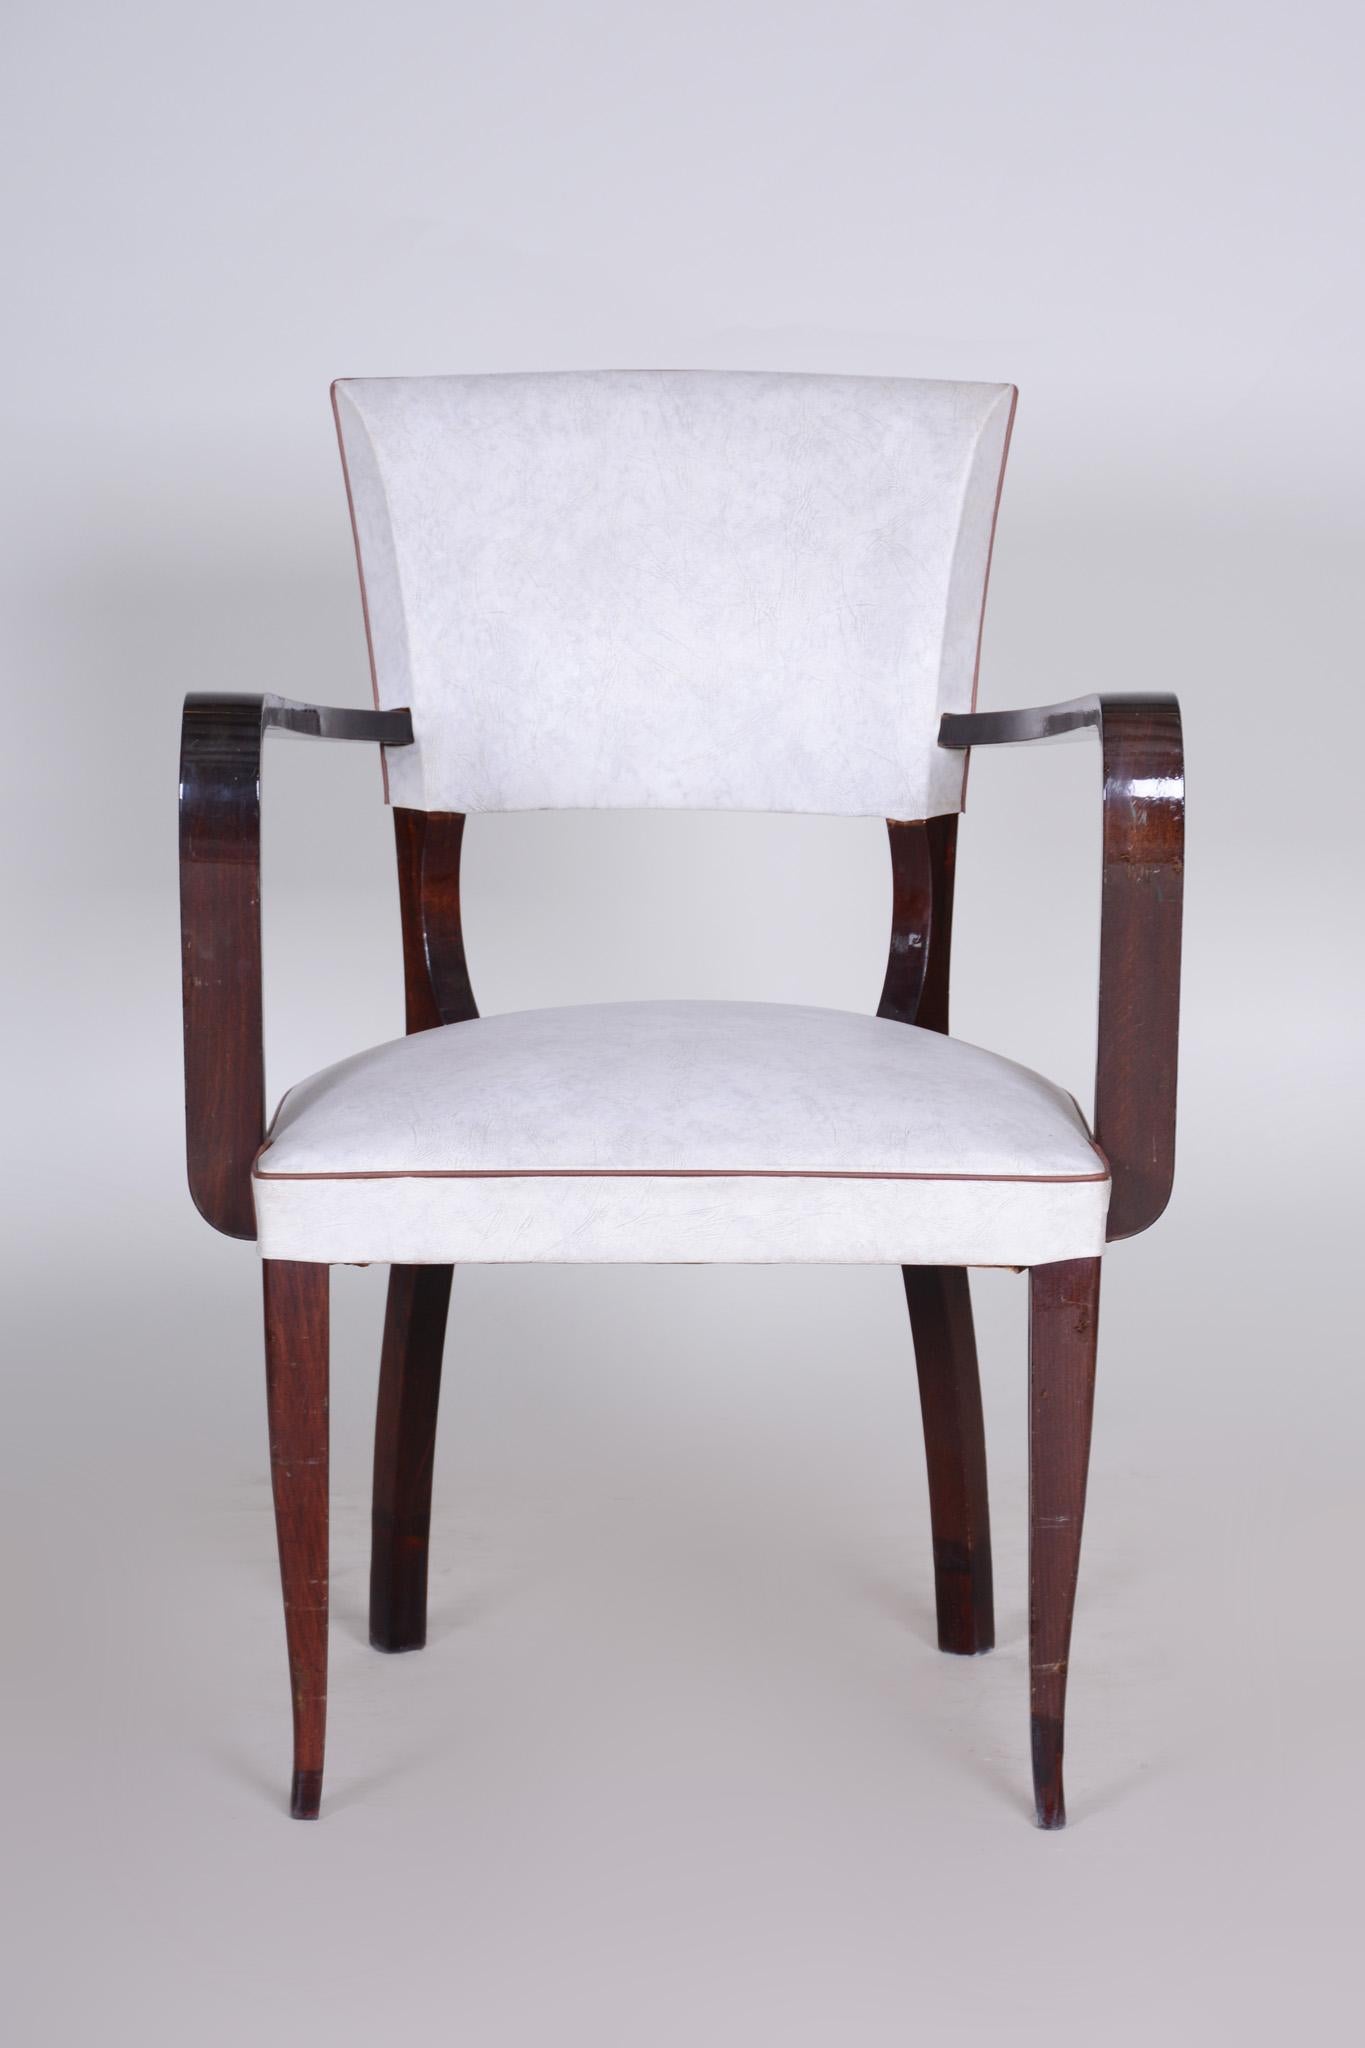 Style: Art Deco
Source: France
Period: 1930-1939.
Material: Oak
Completely restored.
New professional upholstery and fabric.